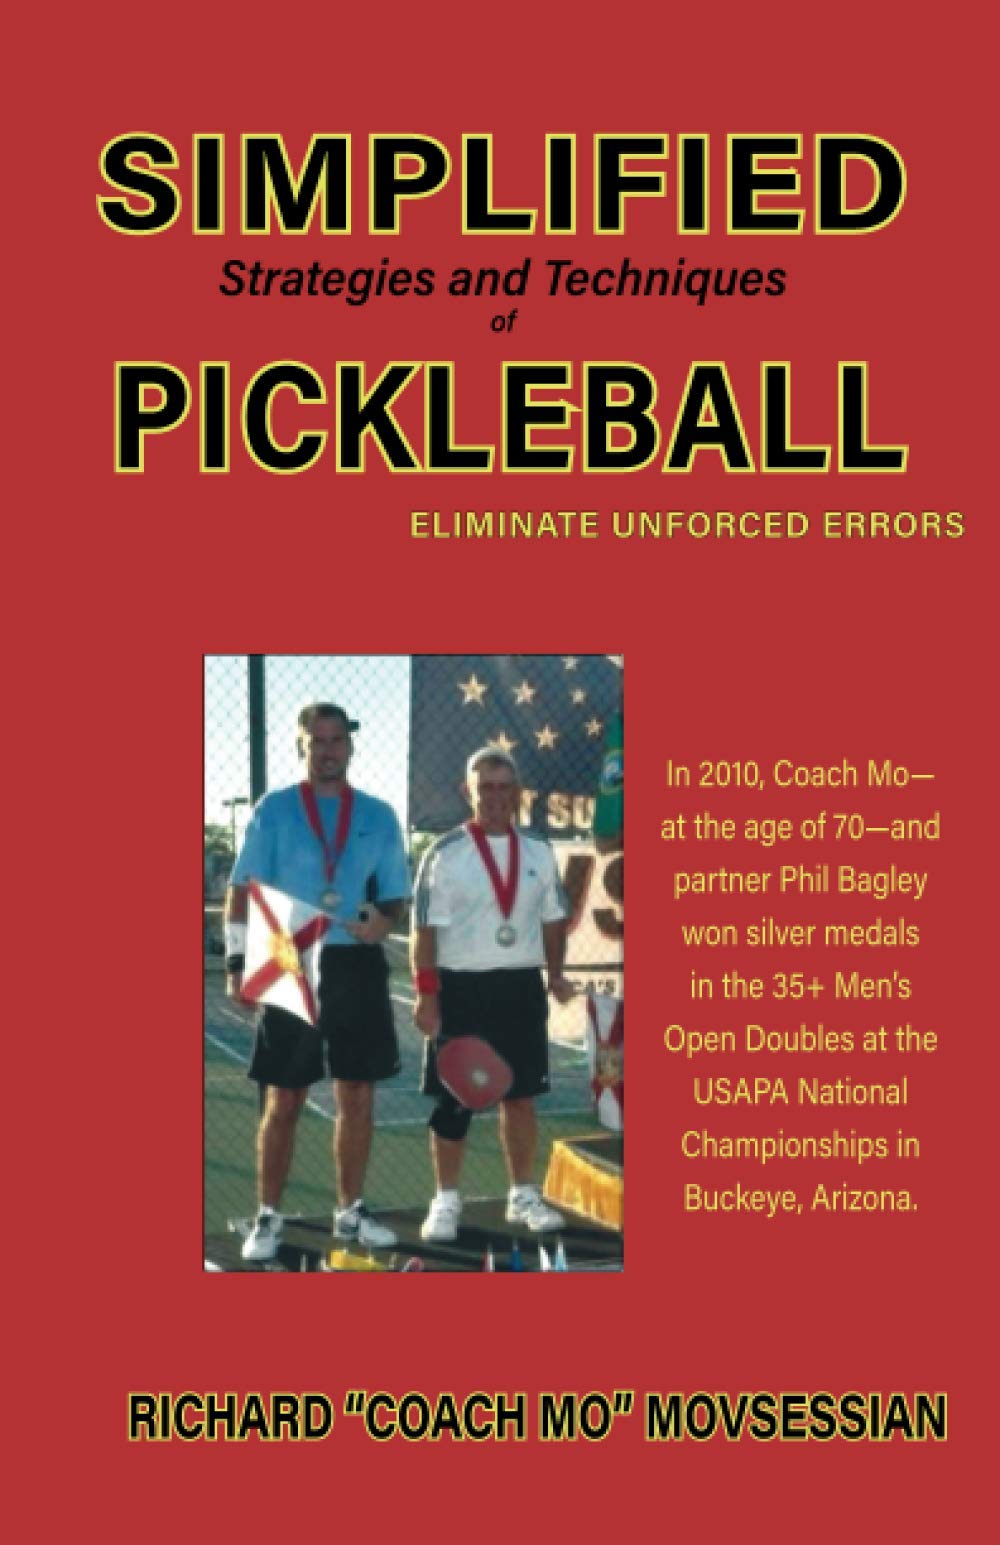 Simplified Strategies and Techniques of Pickleball